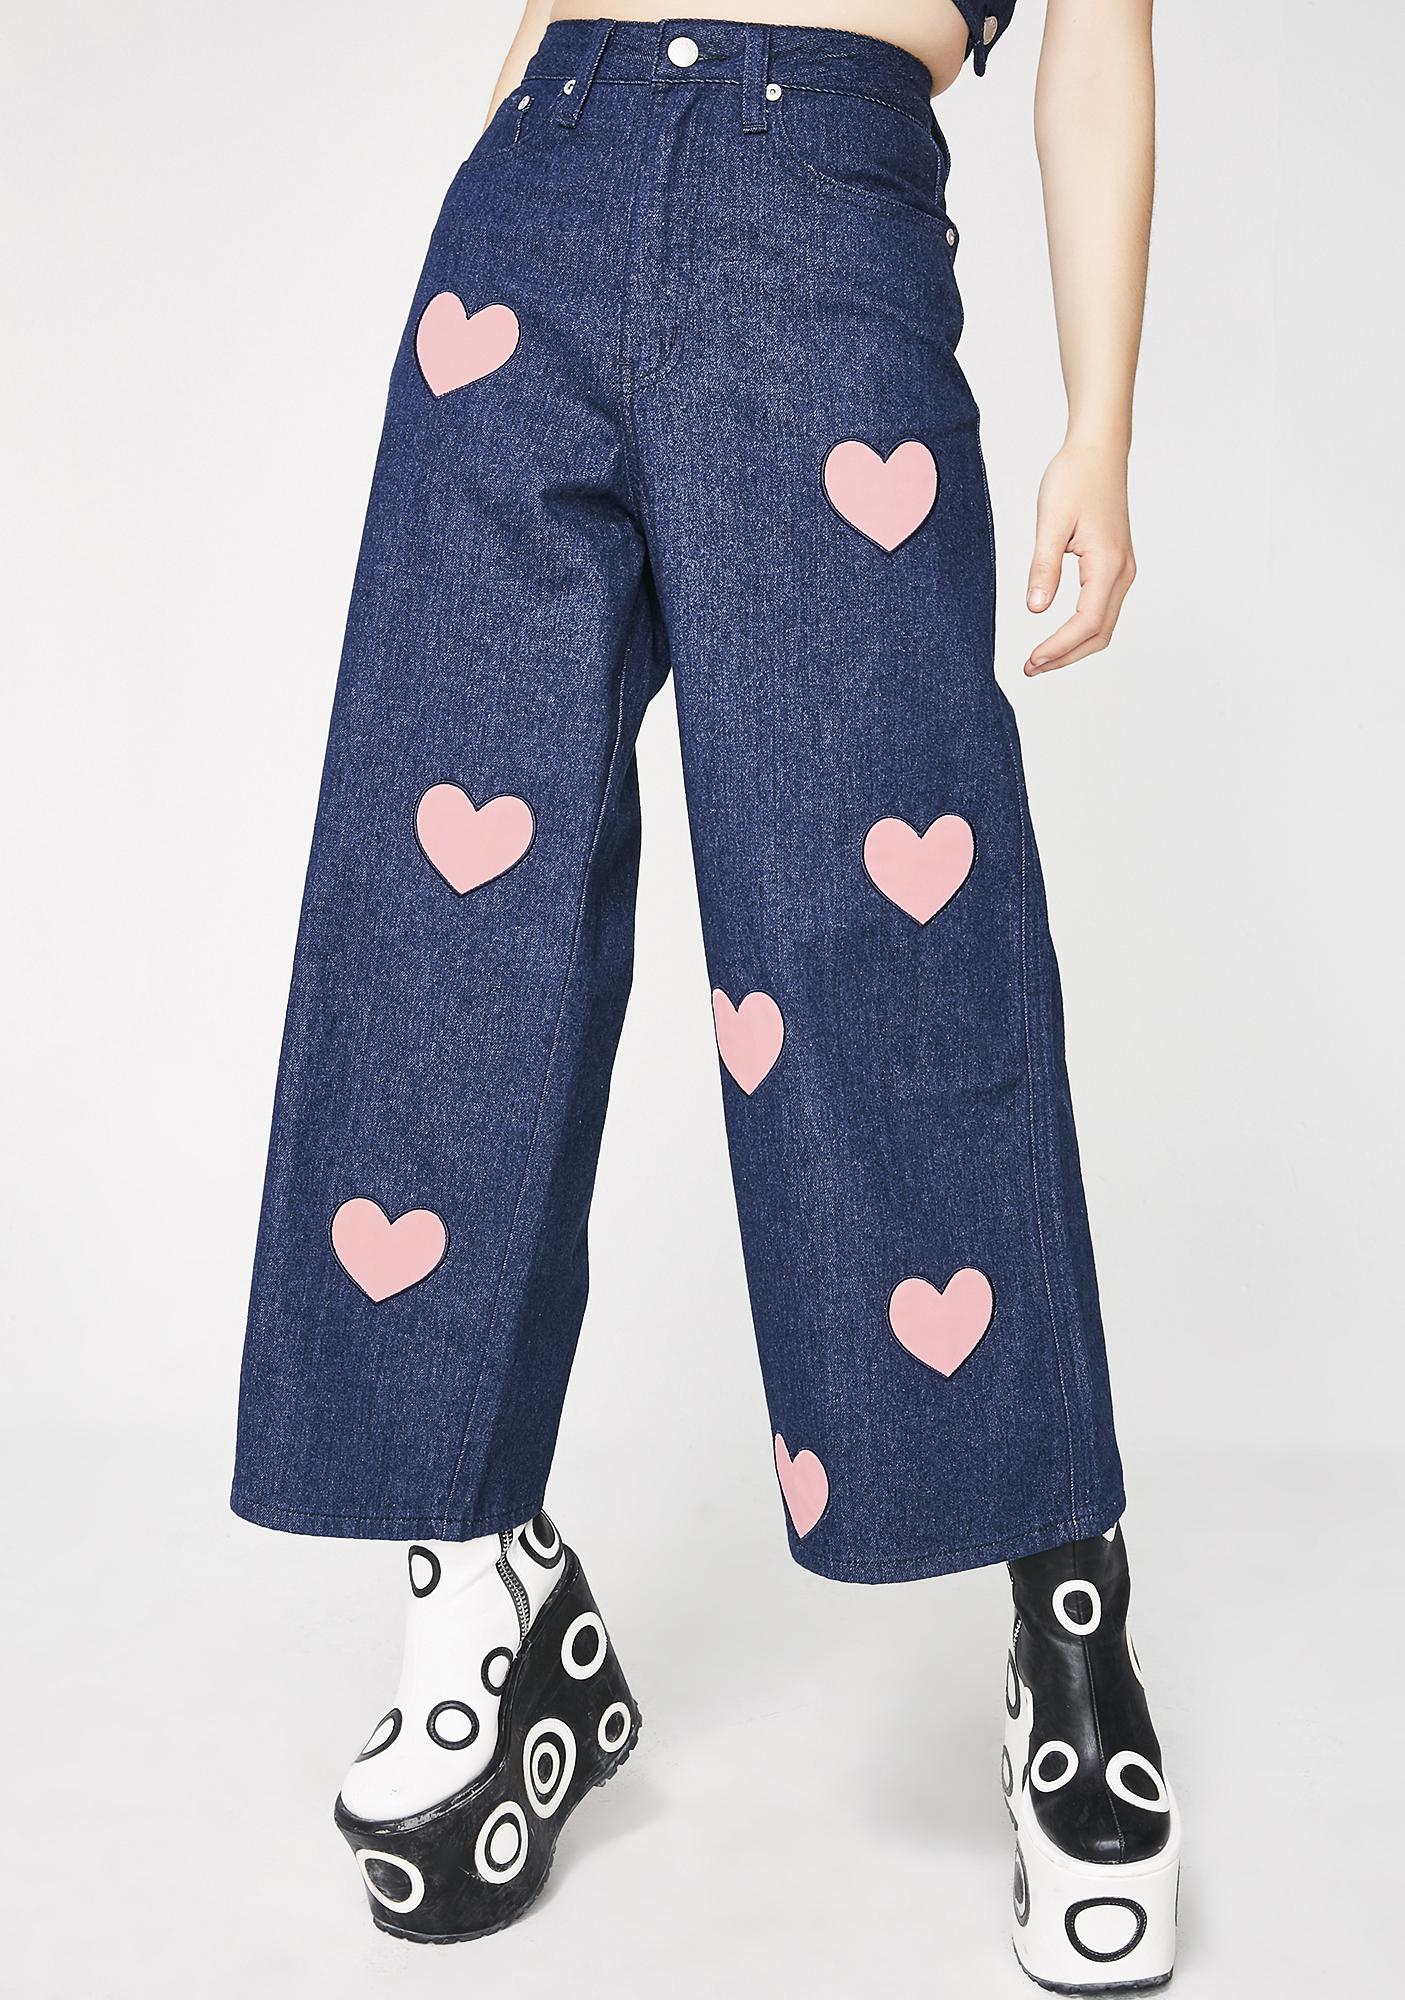 jeans with heart cut out